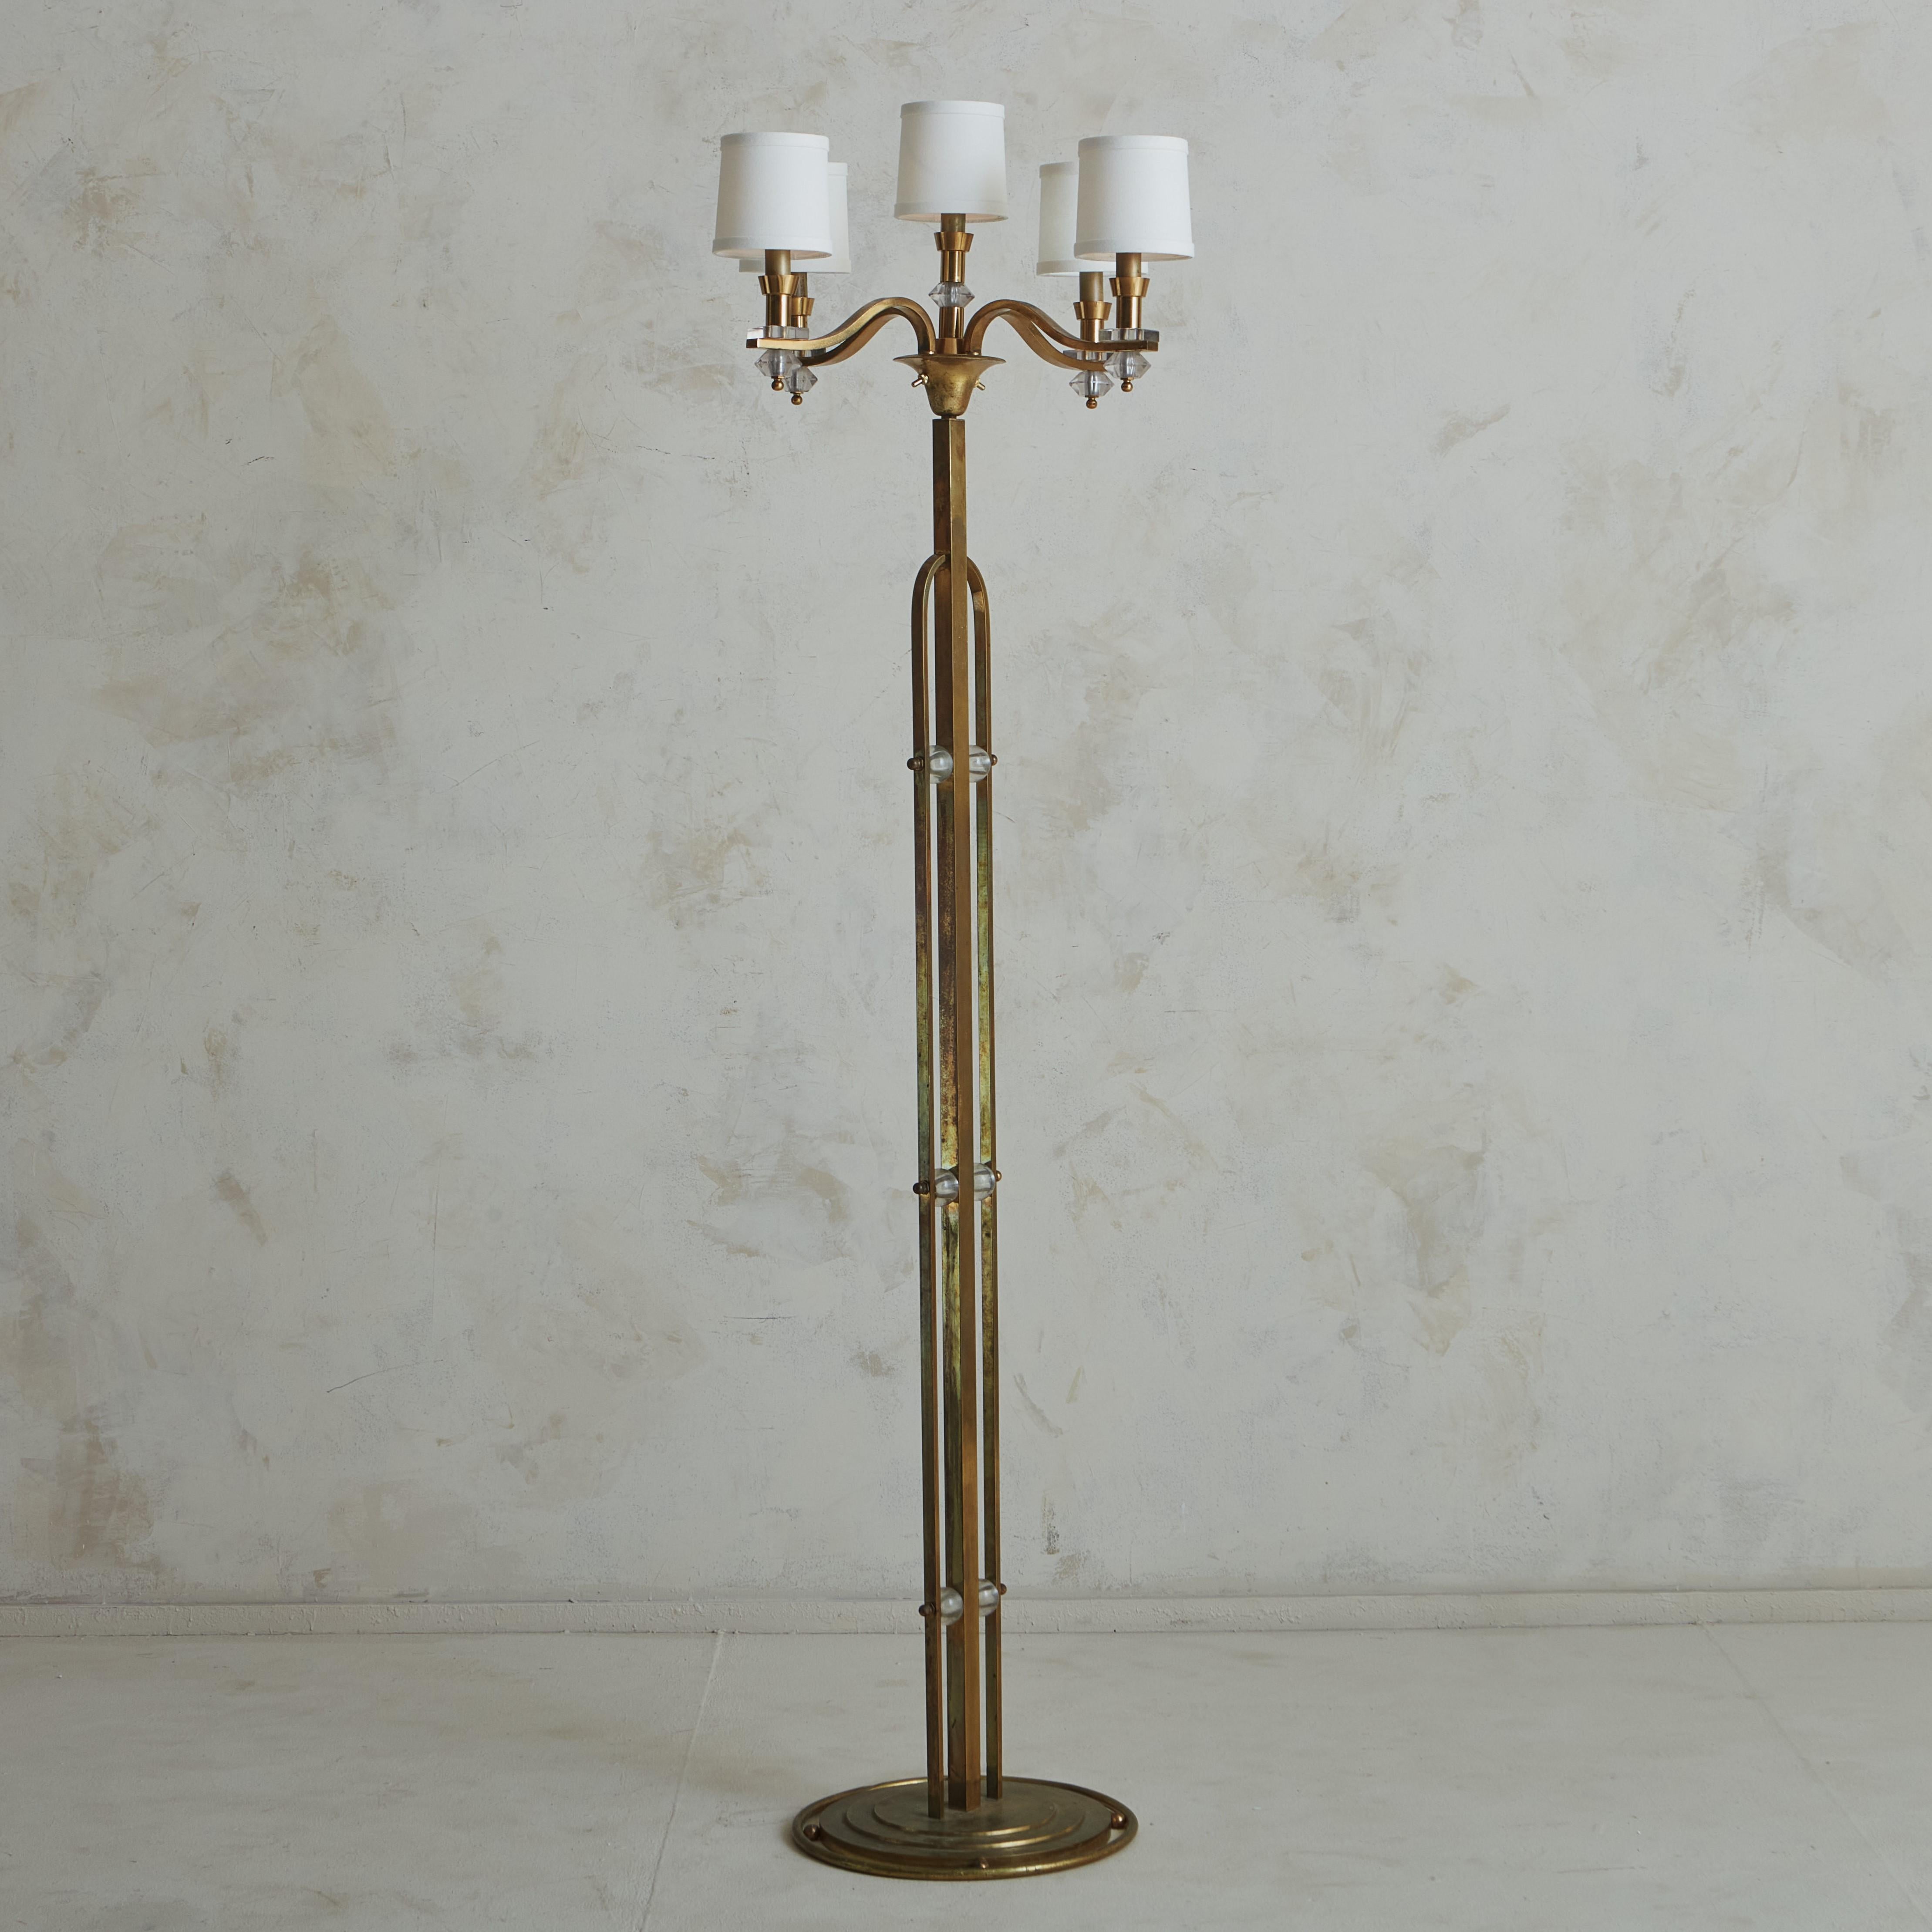 French 1940s Brass Floor Lamp With Blown Glass Accents For Sale